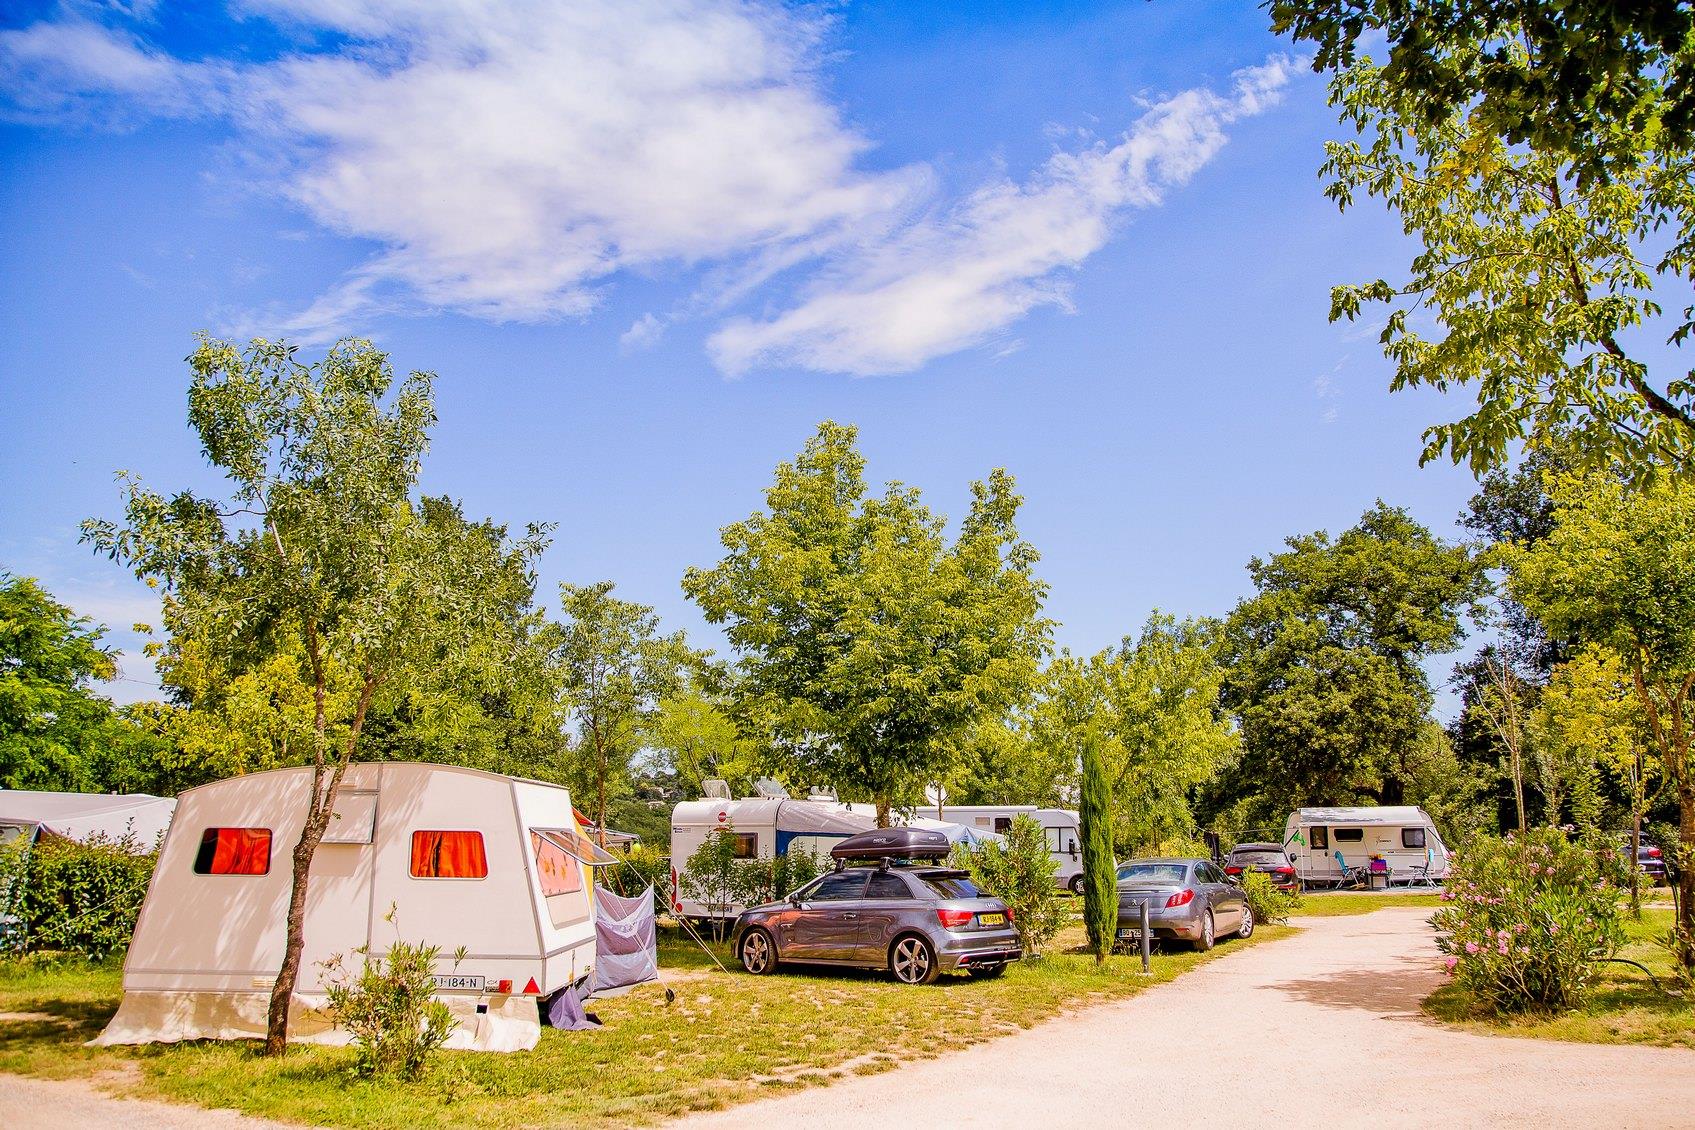 Pitch - Pitch - 100M² With Water, Wastewater Disposal And Electricity ( 16 A ) - Camping Les Coudoulets